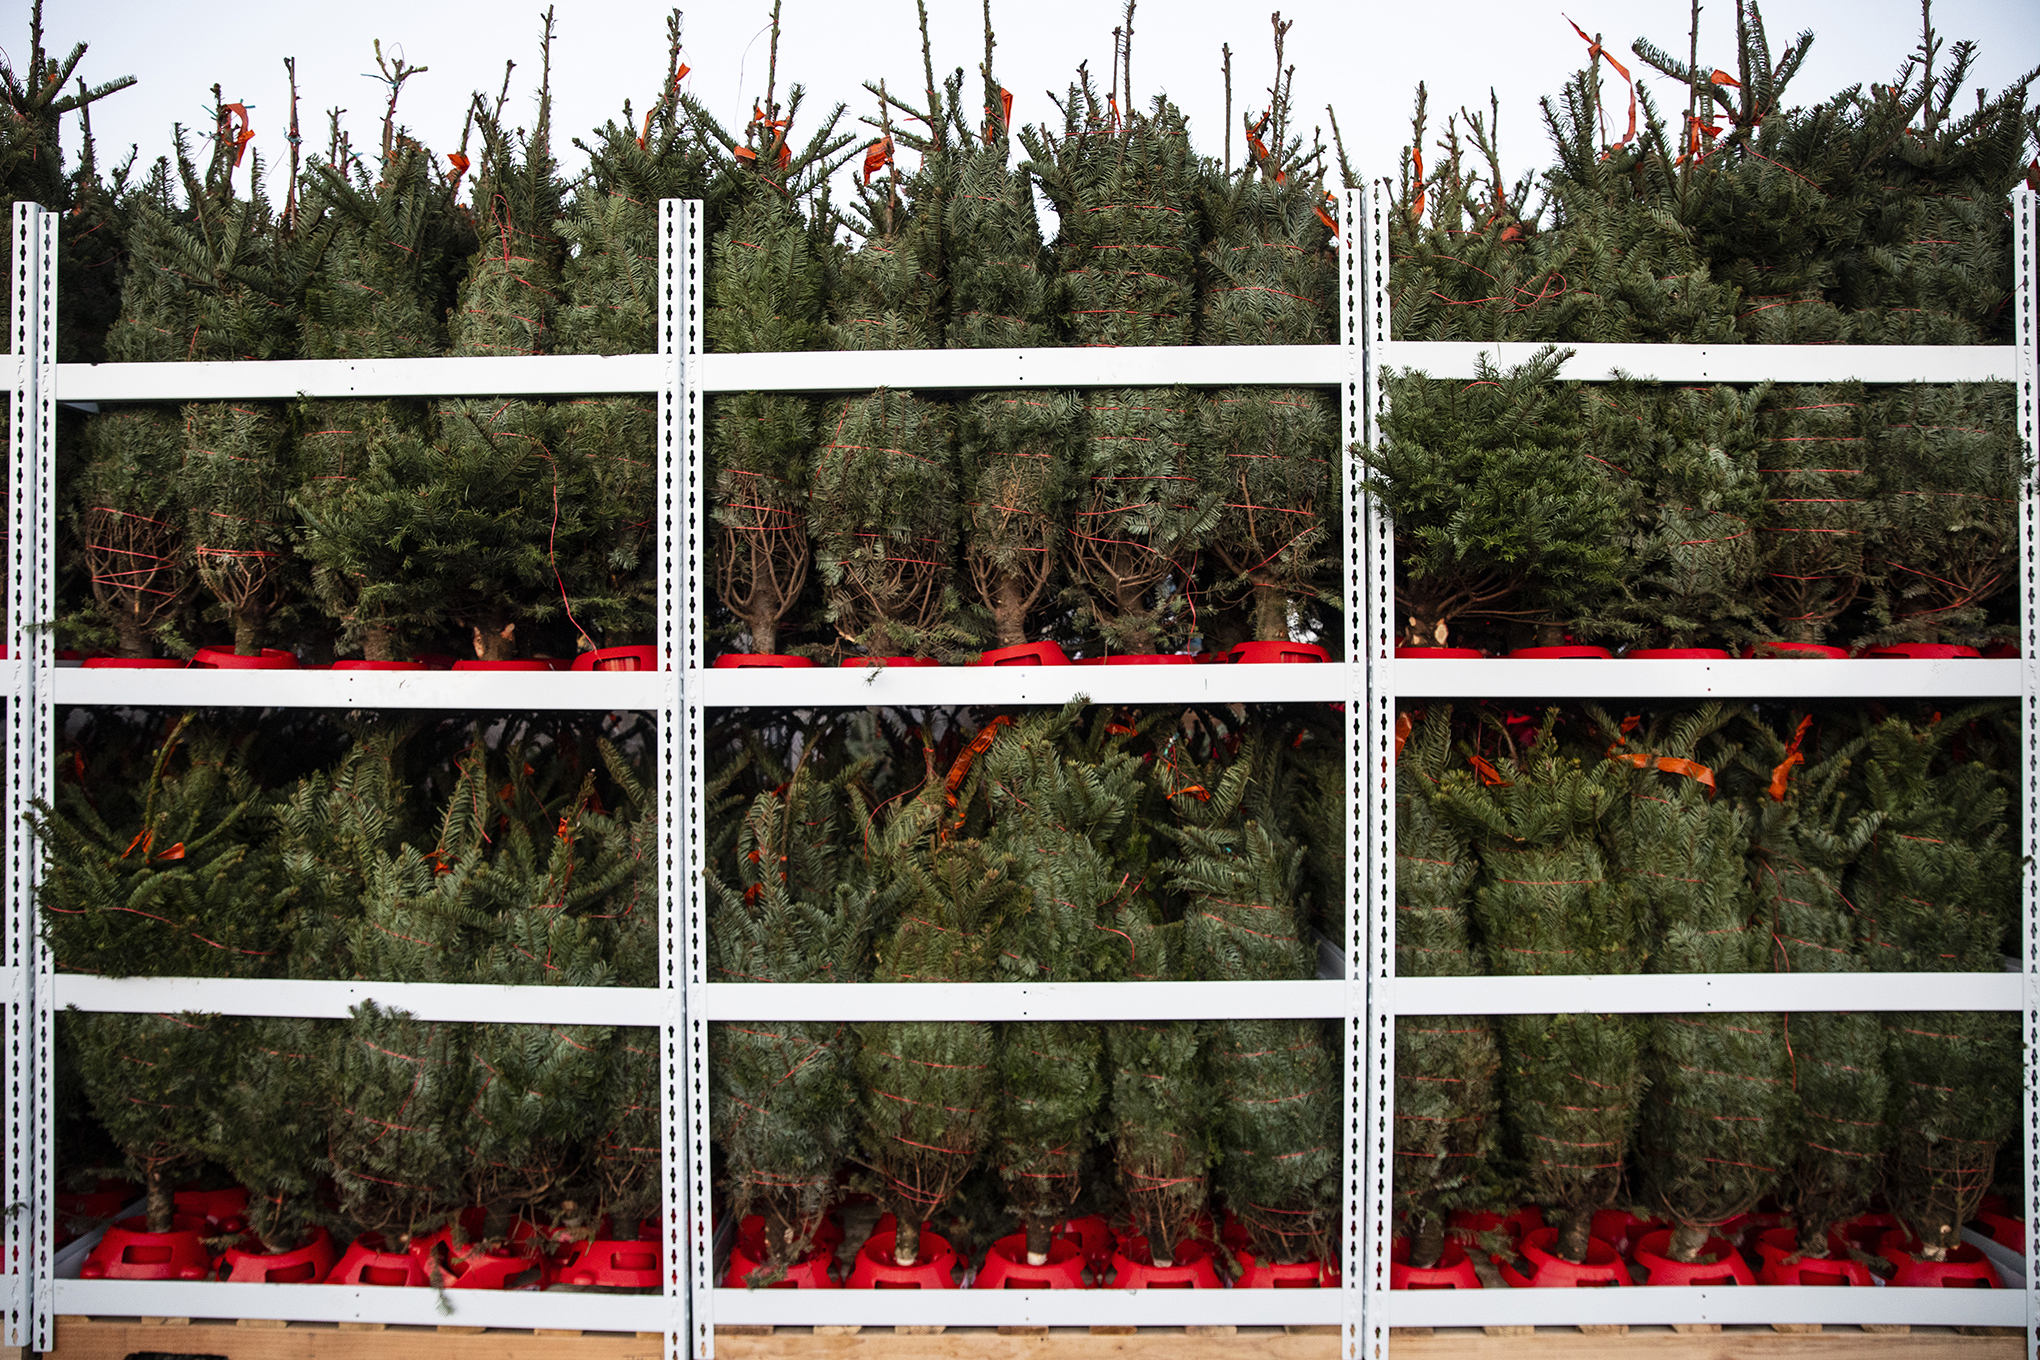 Here’s how to safely dispose of your natural Christmas tree after the holidays